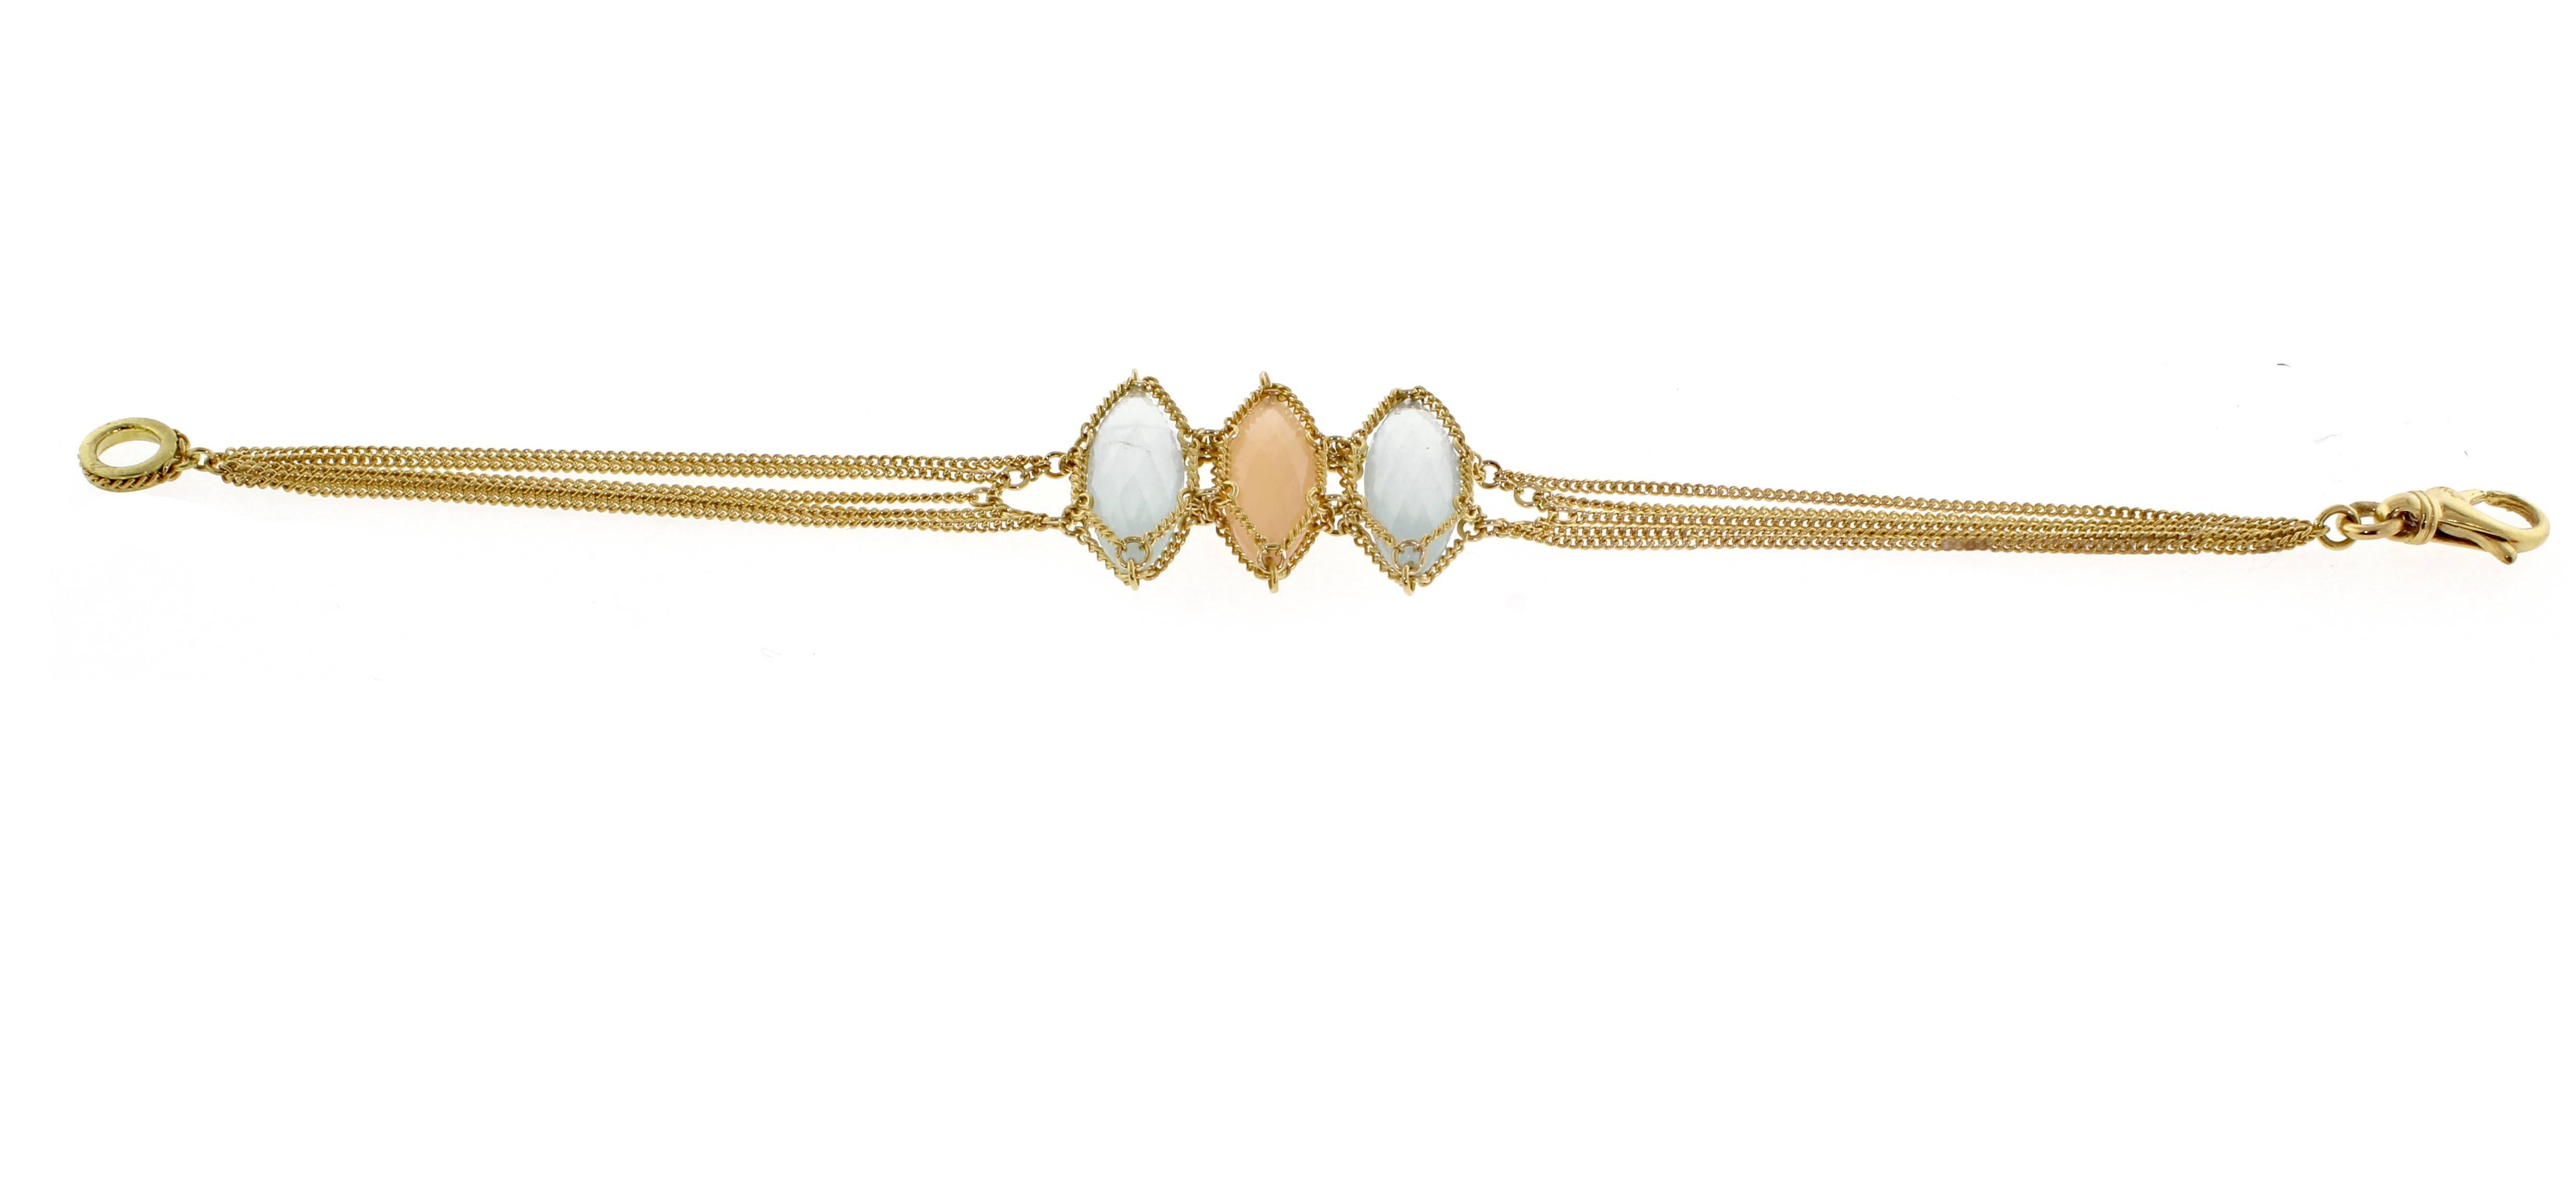 From World-famous jewelry designers Anthony Camargo and Nak Armstrong this hand made peach and white moonstone 18 Karat bracelet. 7 inches